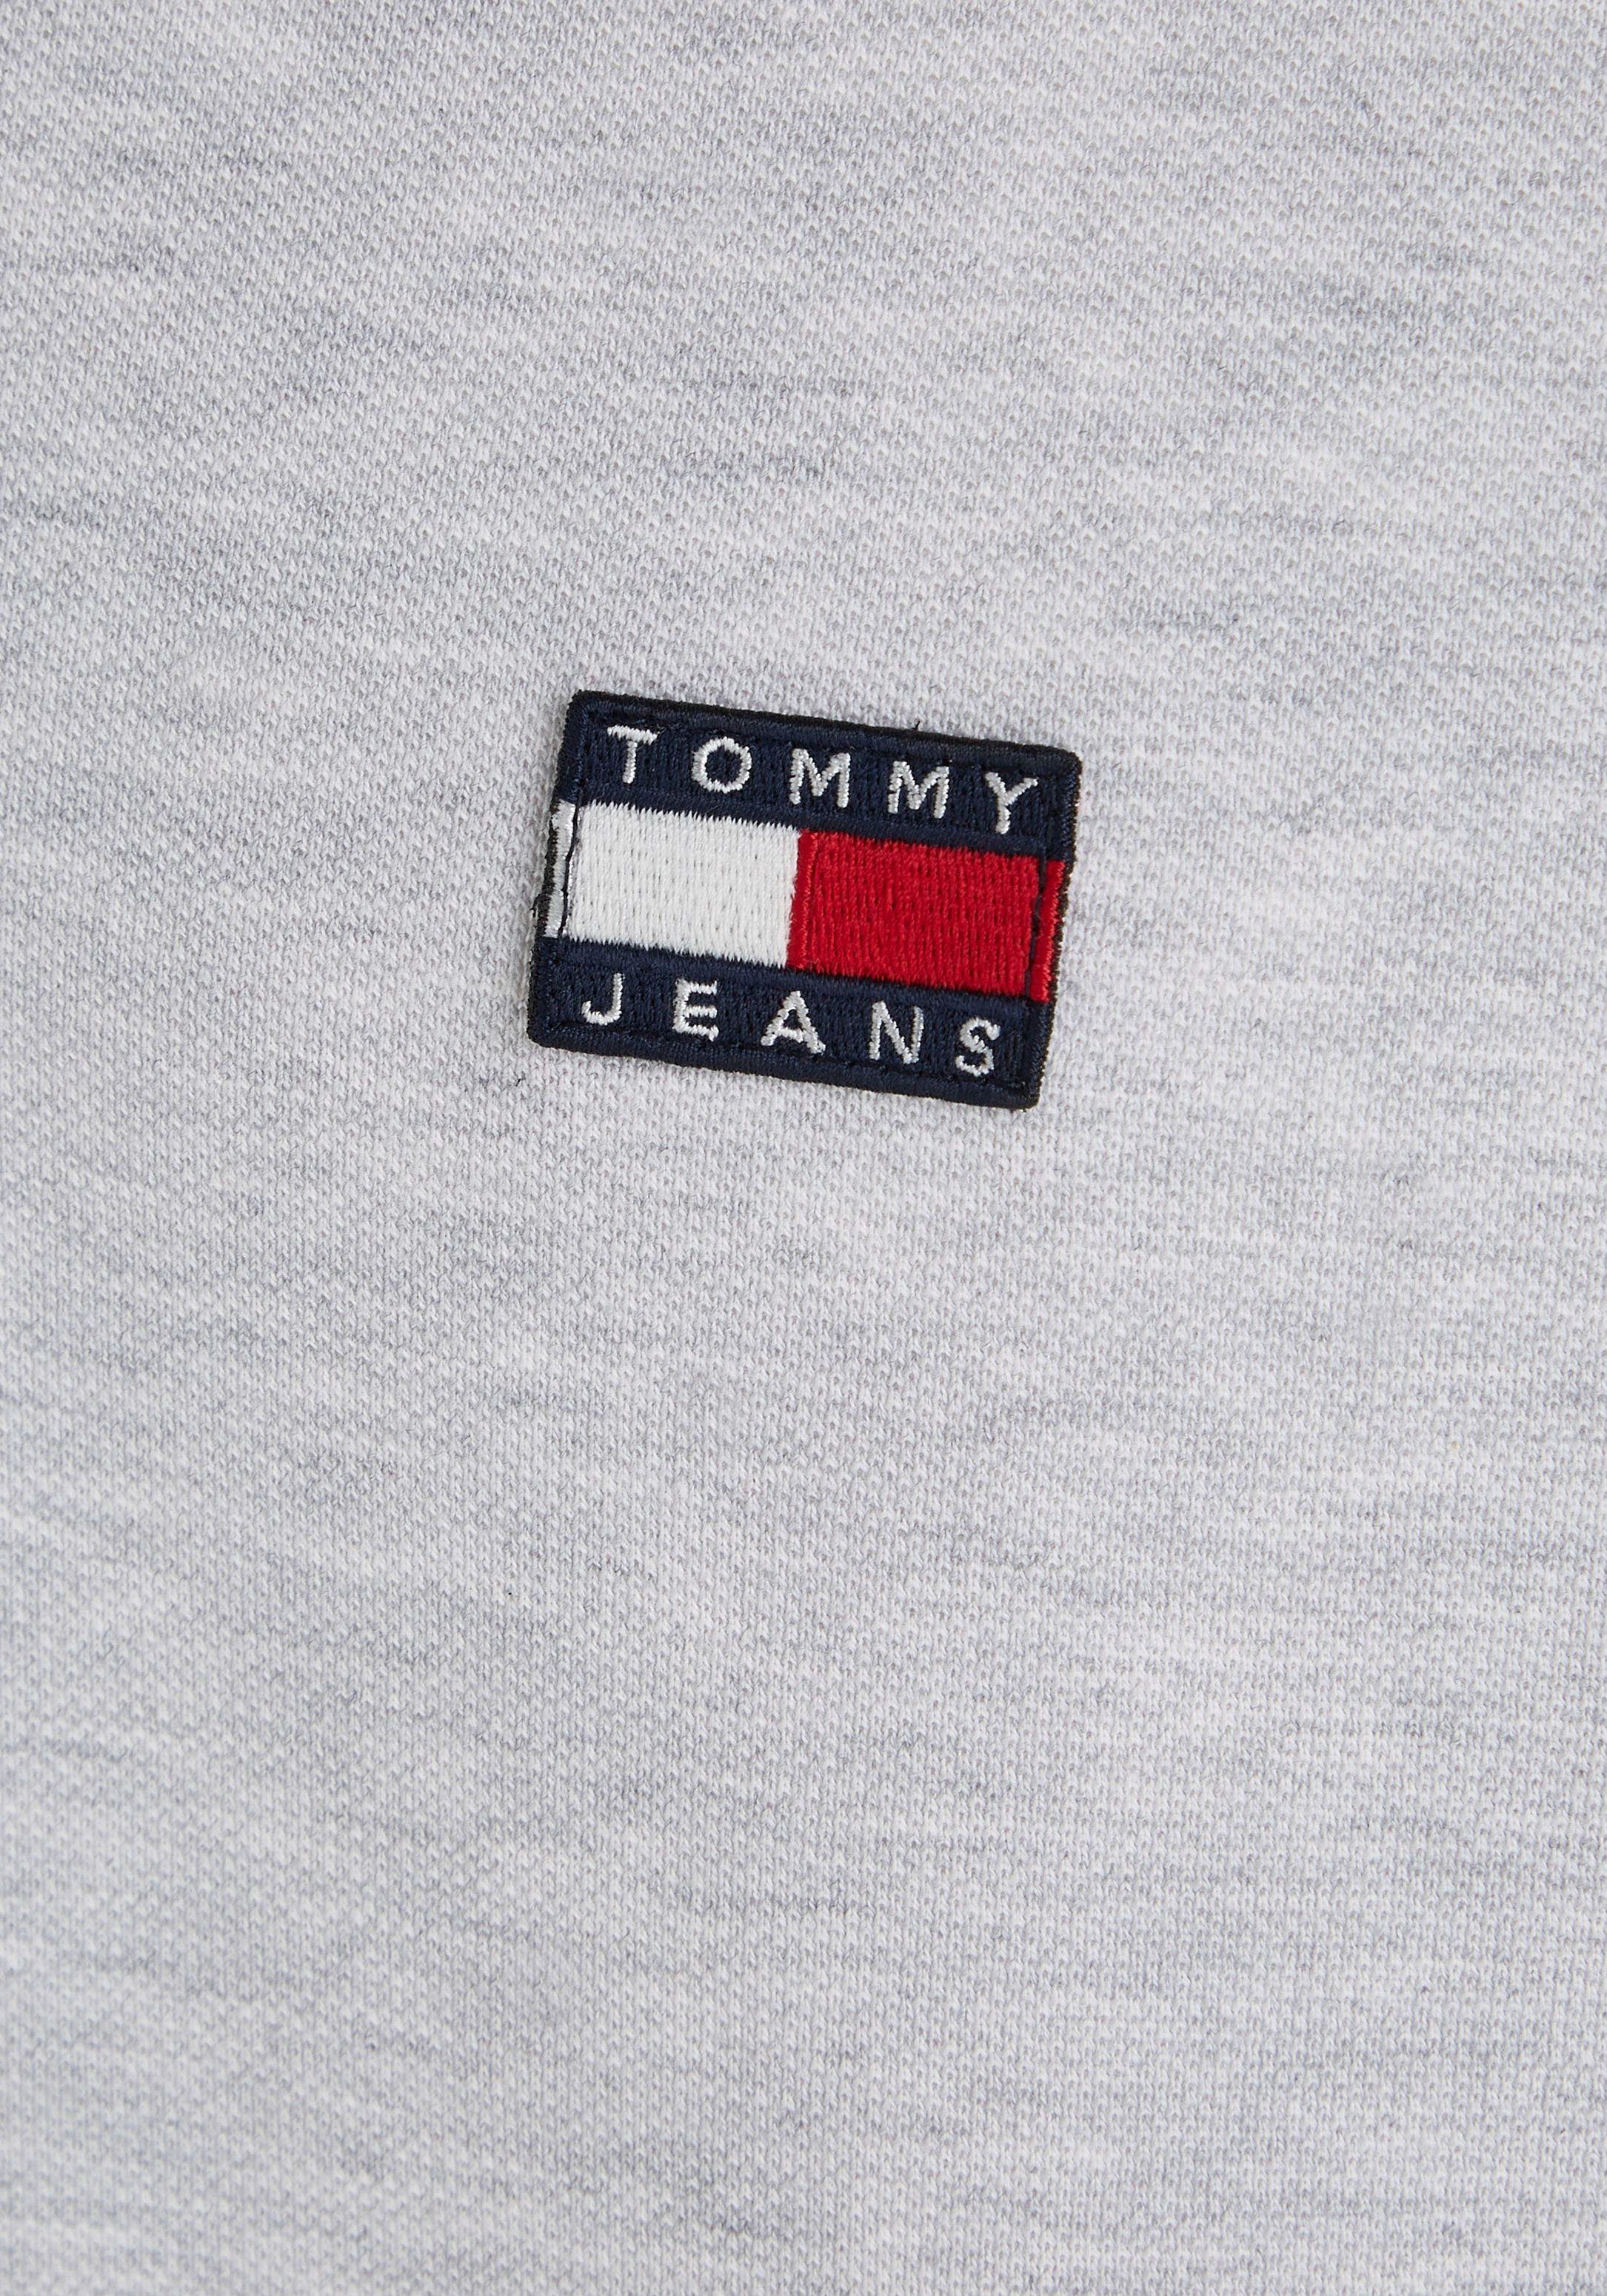 Htr Silver Jeans Grey TJM DETAIL Tommy Poloshirt TIPPING POLO CLSC